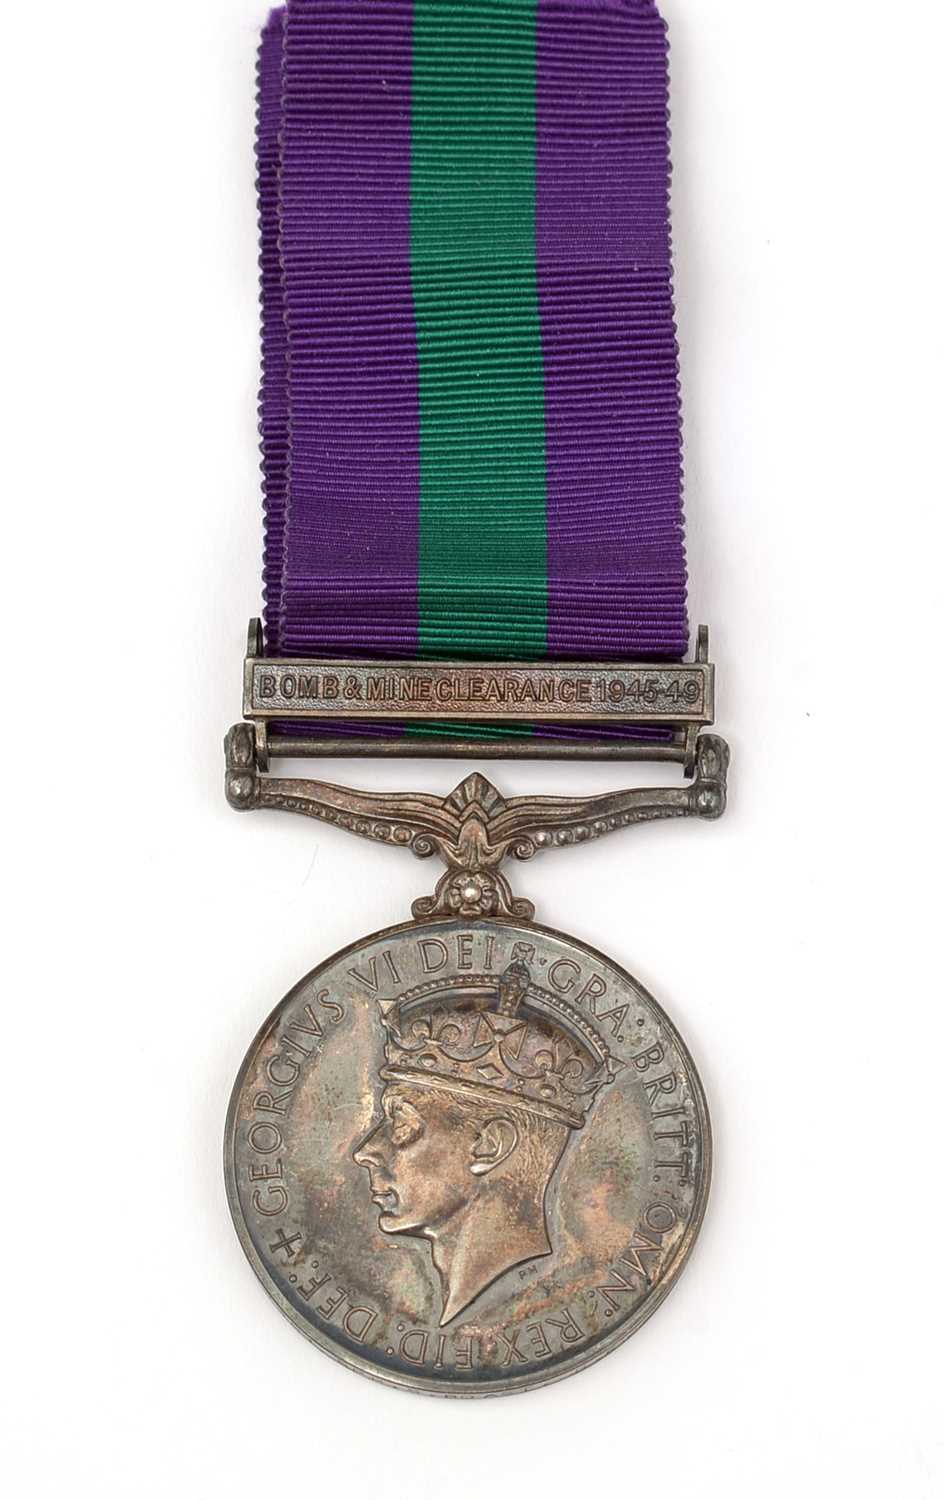 Lot 1006 - A George VI General Service Medal, with Bomb & Mine Clearance 1945-49 clasp